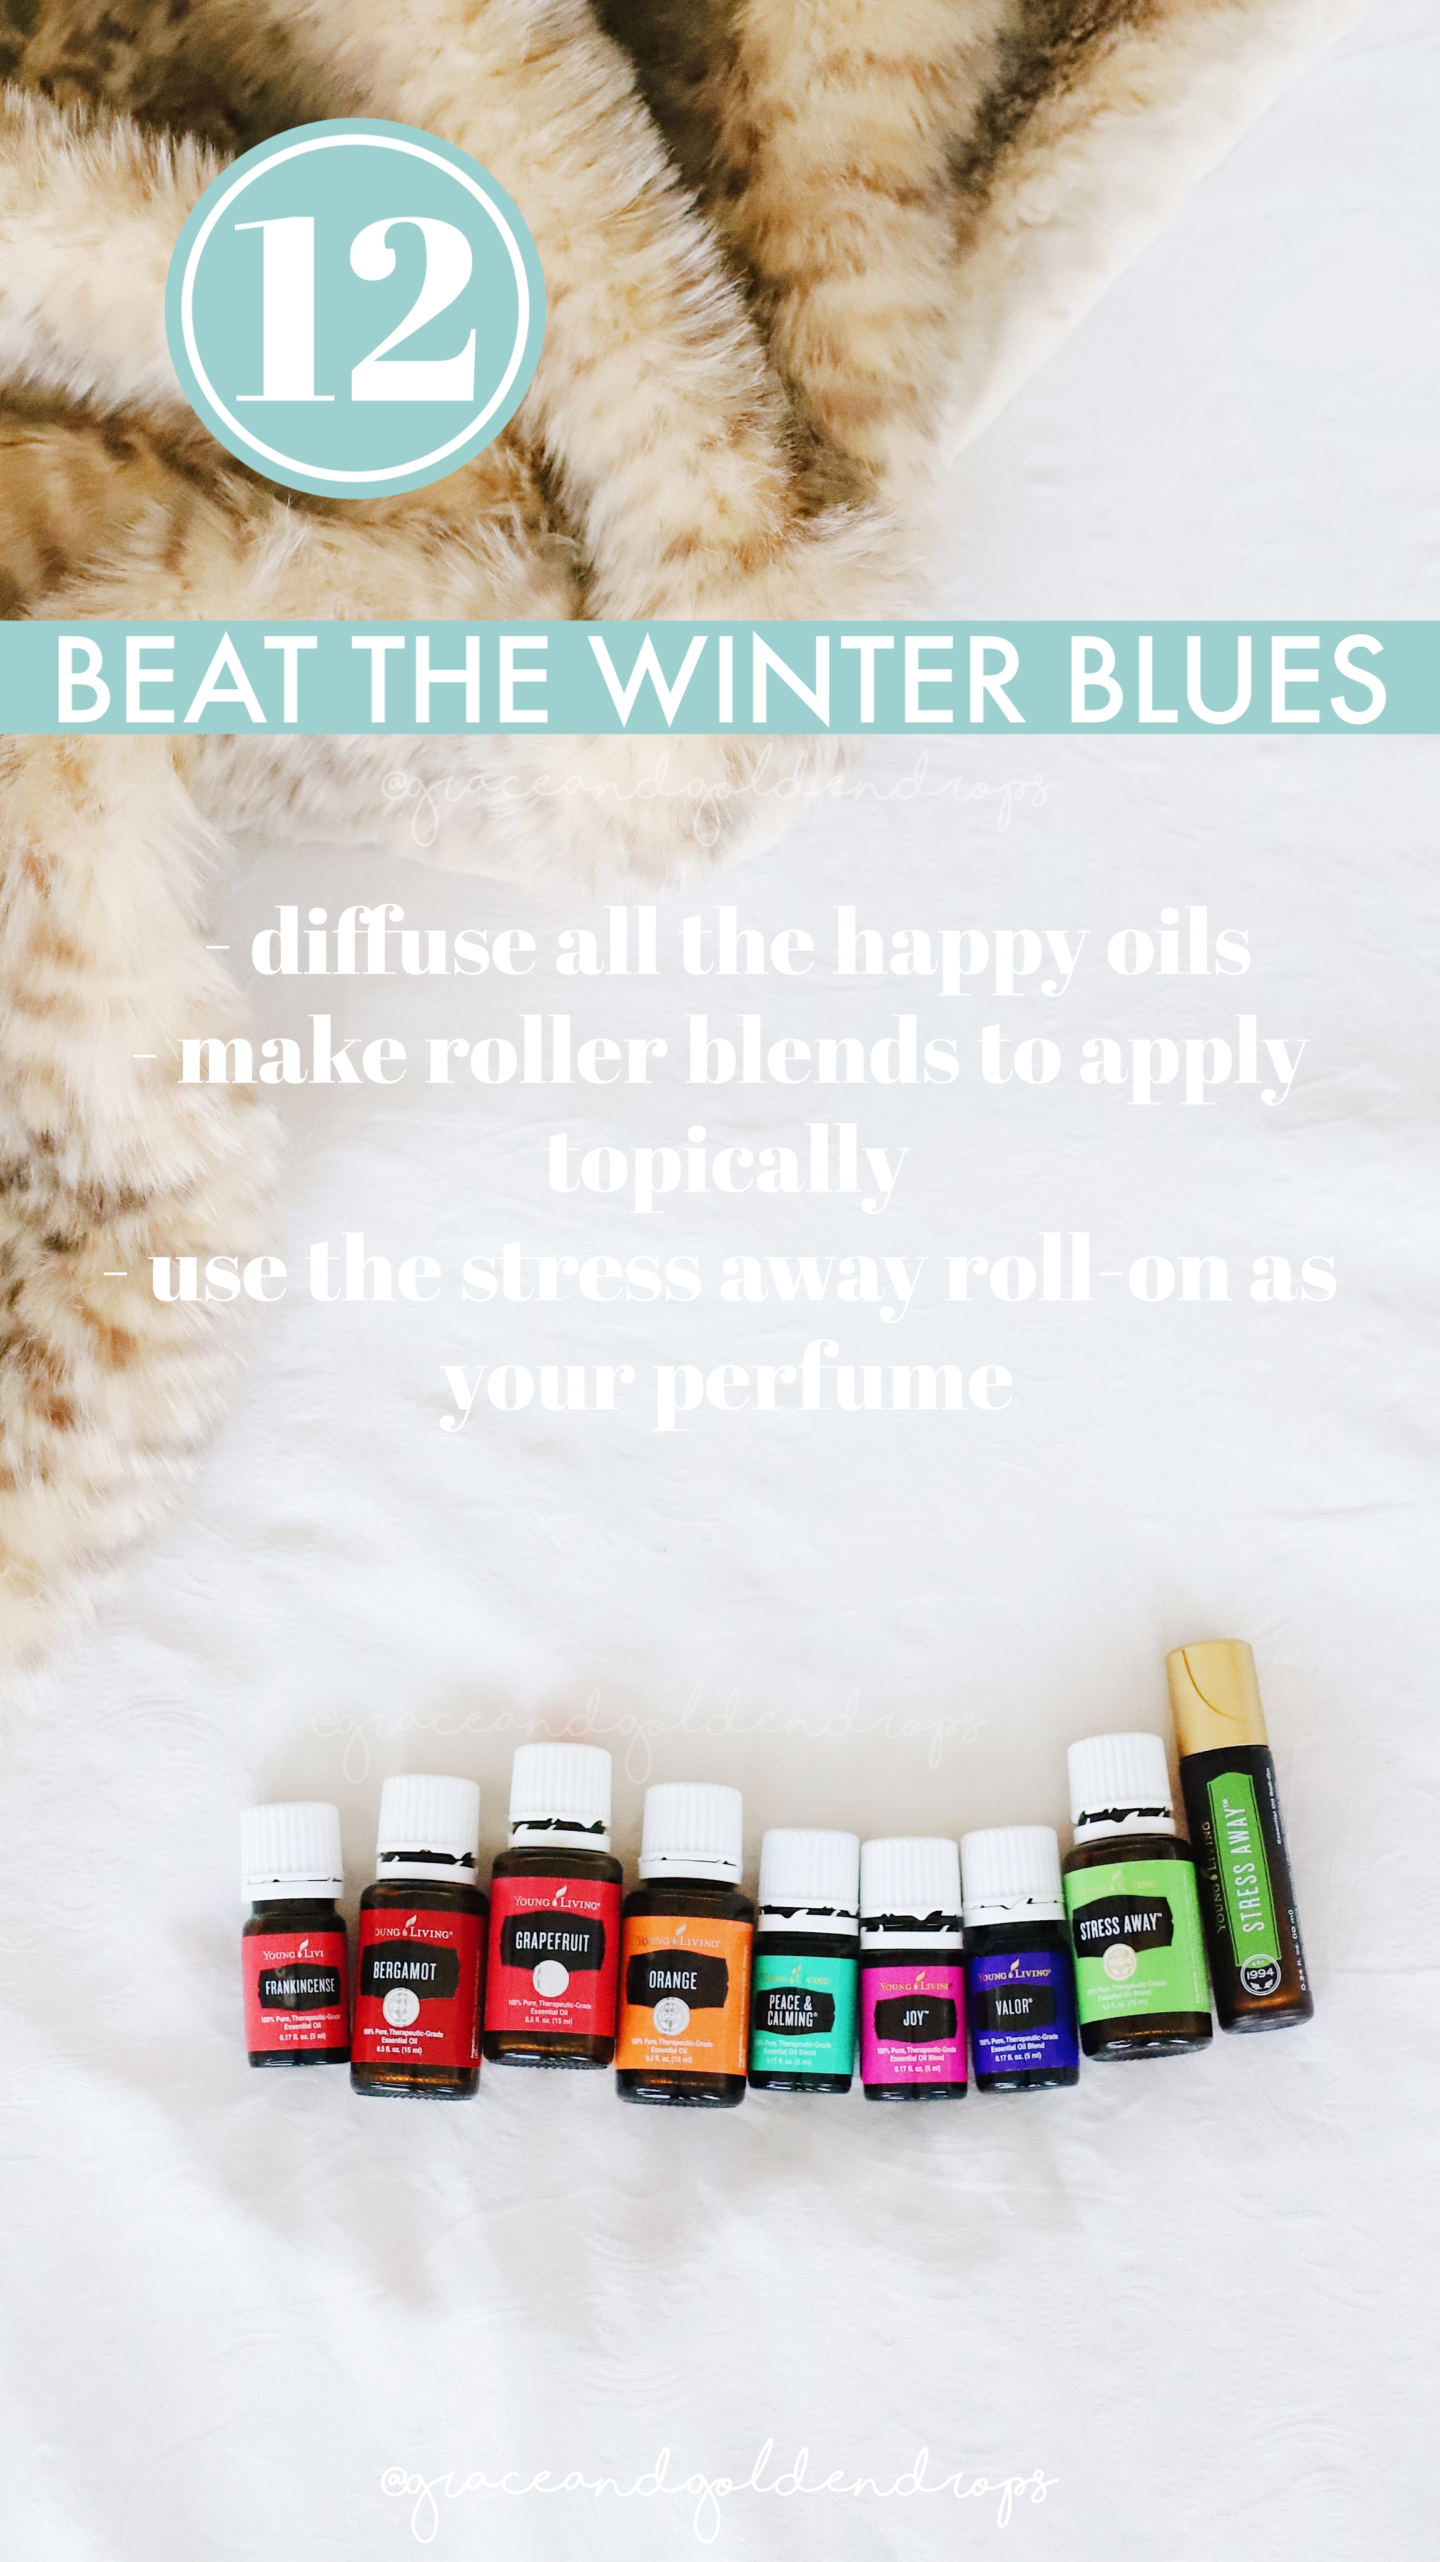 How we can survive and thrive this winter with natural remedies using essential oils and all natural products! Best oils for emotional support.